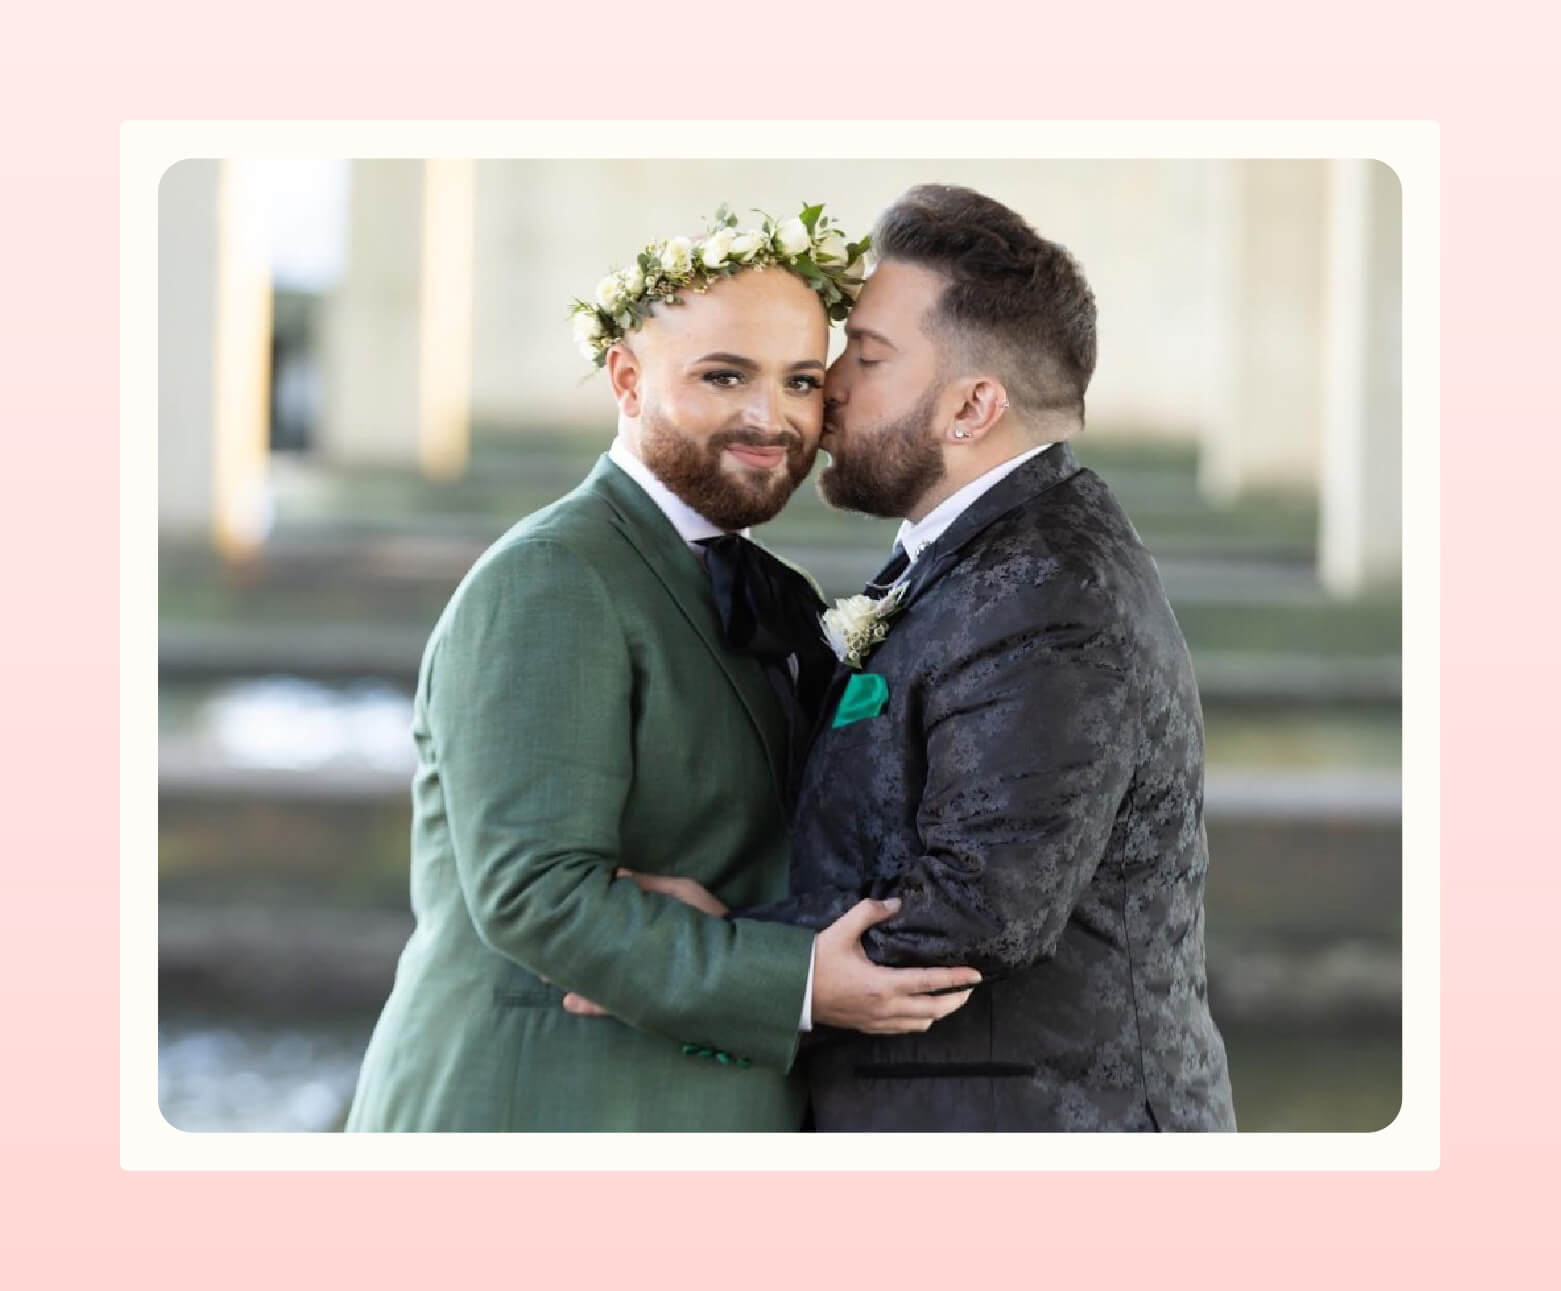 Wedding couple with short beards pose, one looking to camera wearing a green suit jacket and a flower crown while the other kisses their cheek and wears a black textured suit jacket with boutonniere